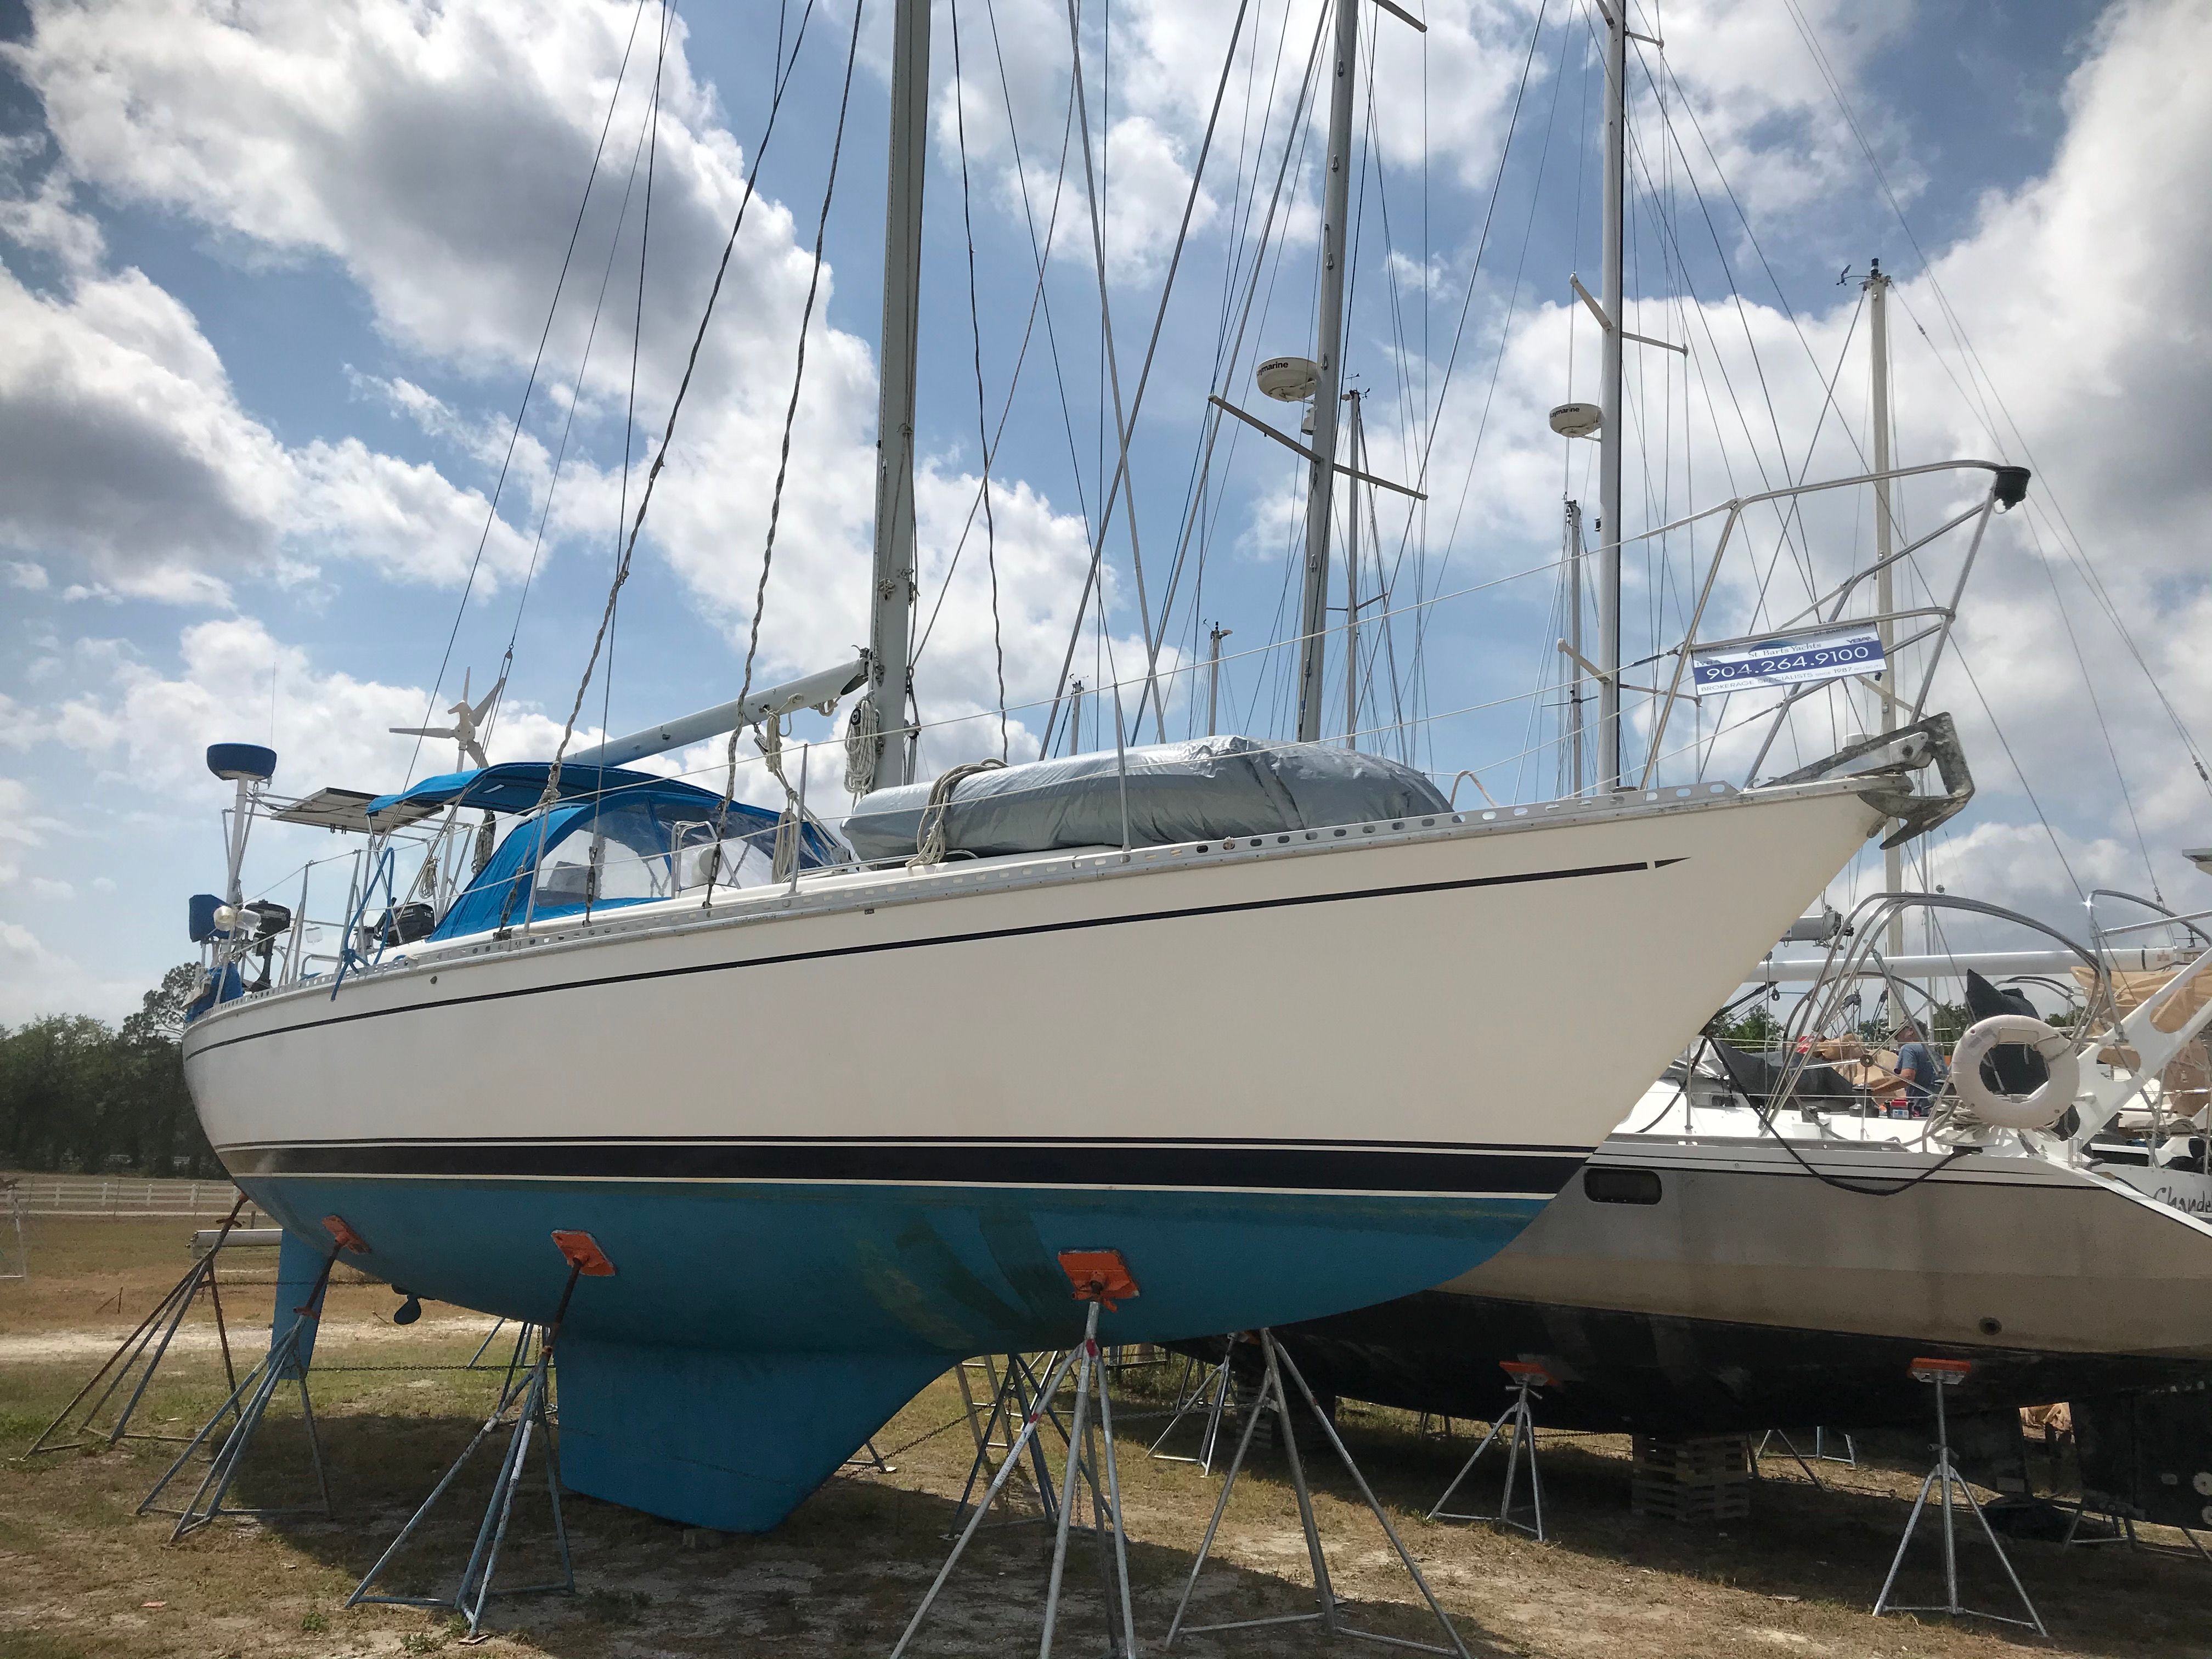 hirsch 45 sailboat for sale